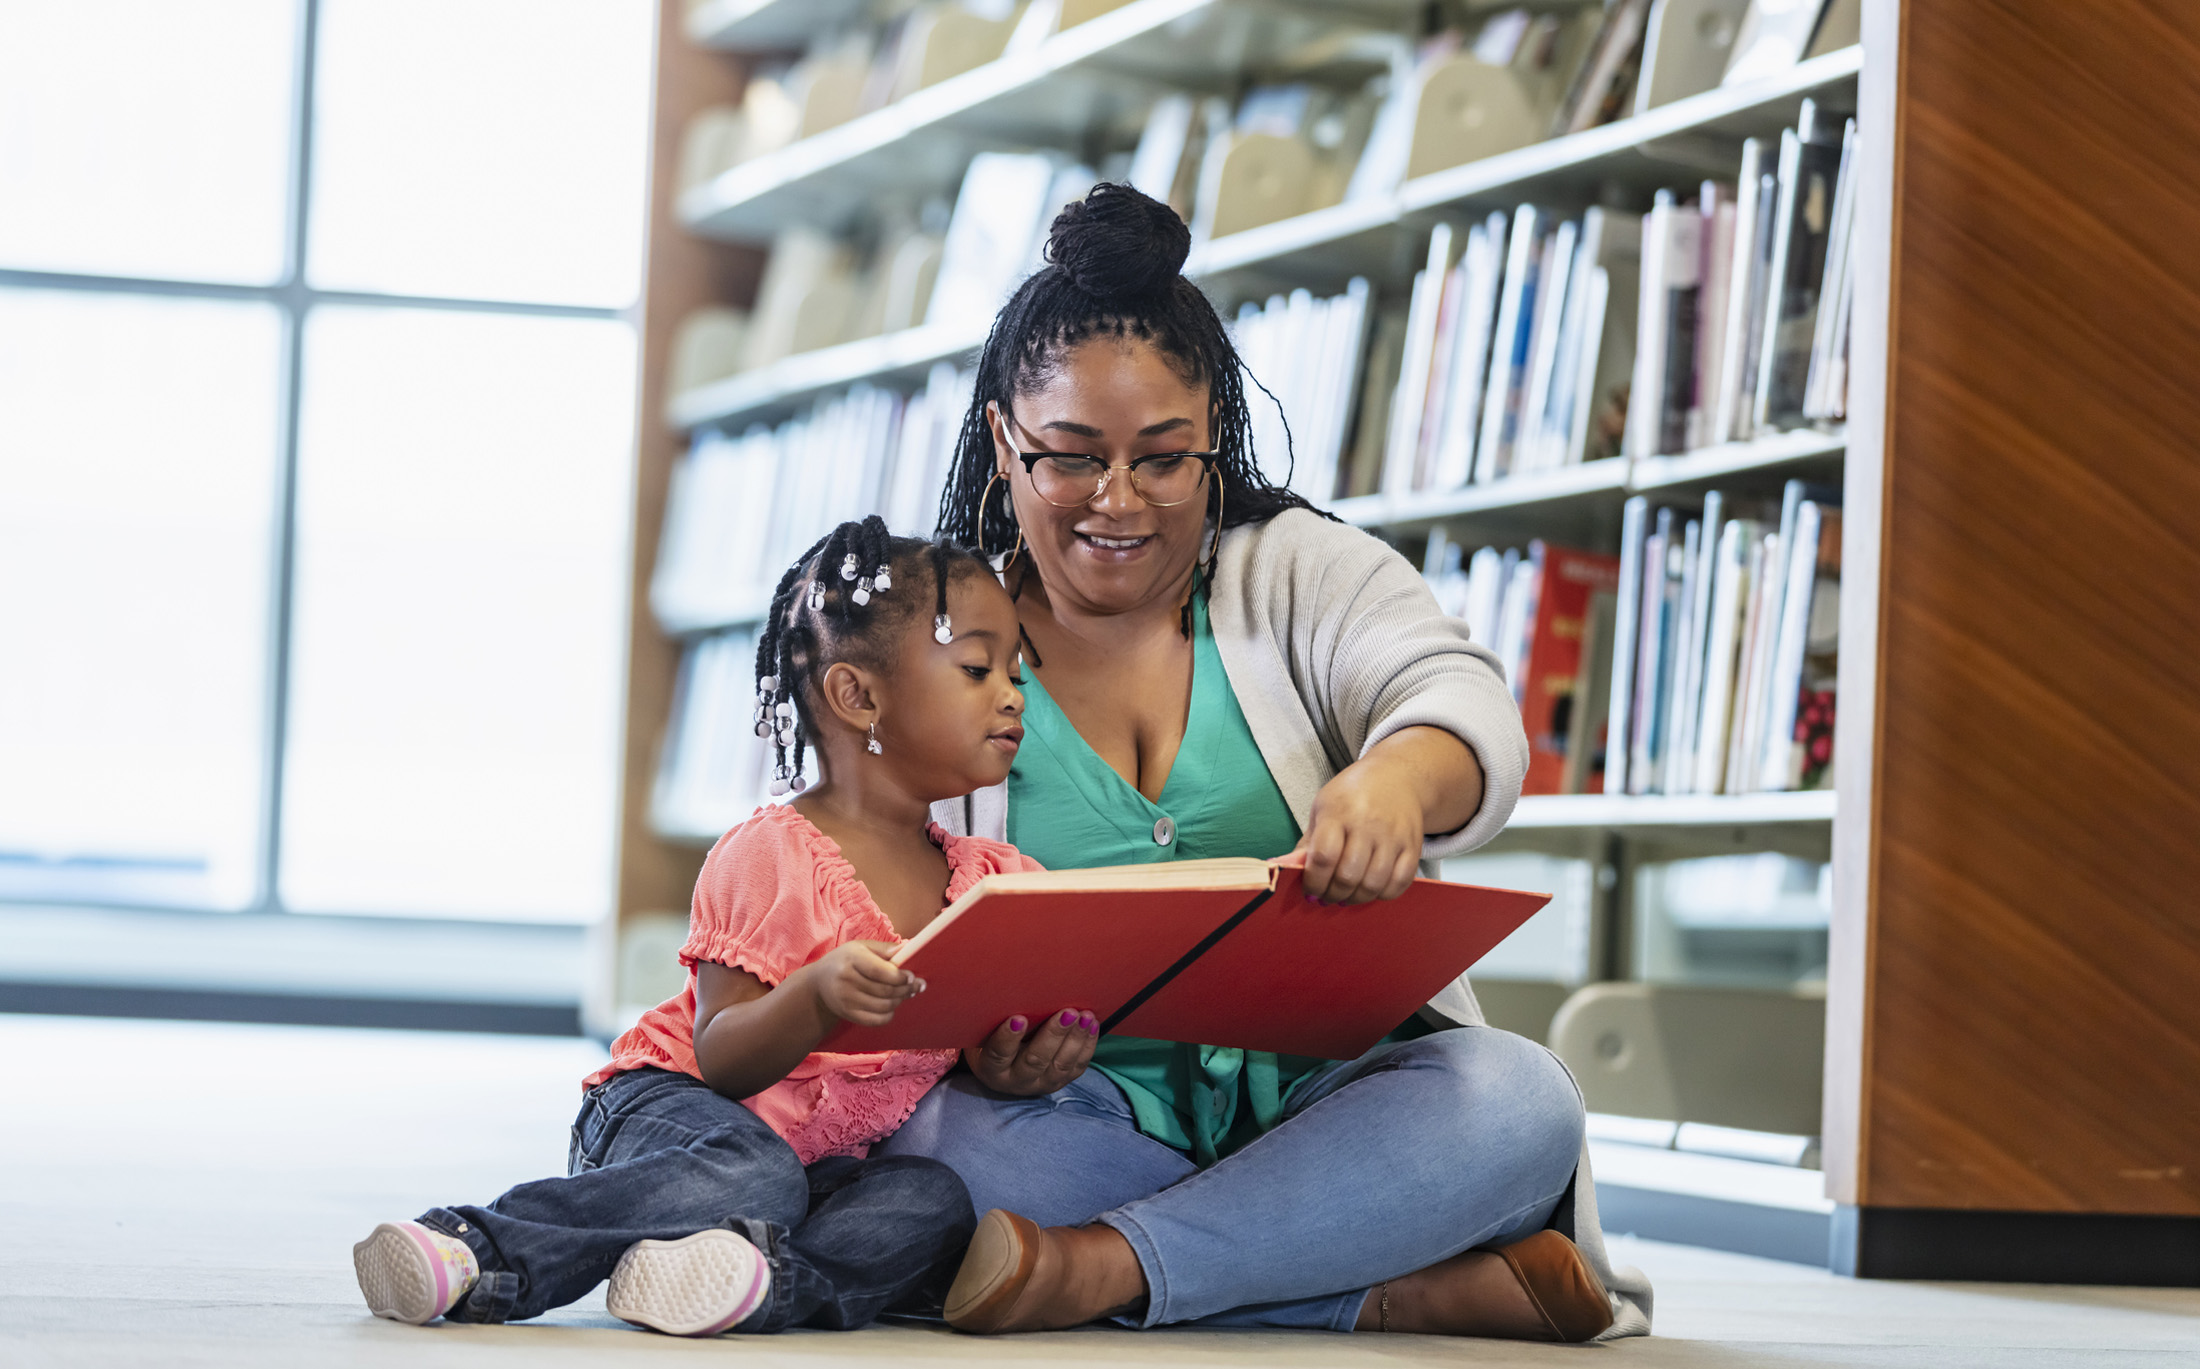 A mixed race mother and daughter sitting on the floor in a library, reading a book. The young child is 3 years old. Her mother is a mature woman in her 40s.